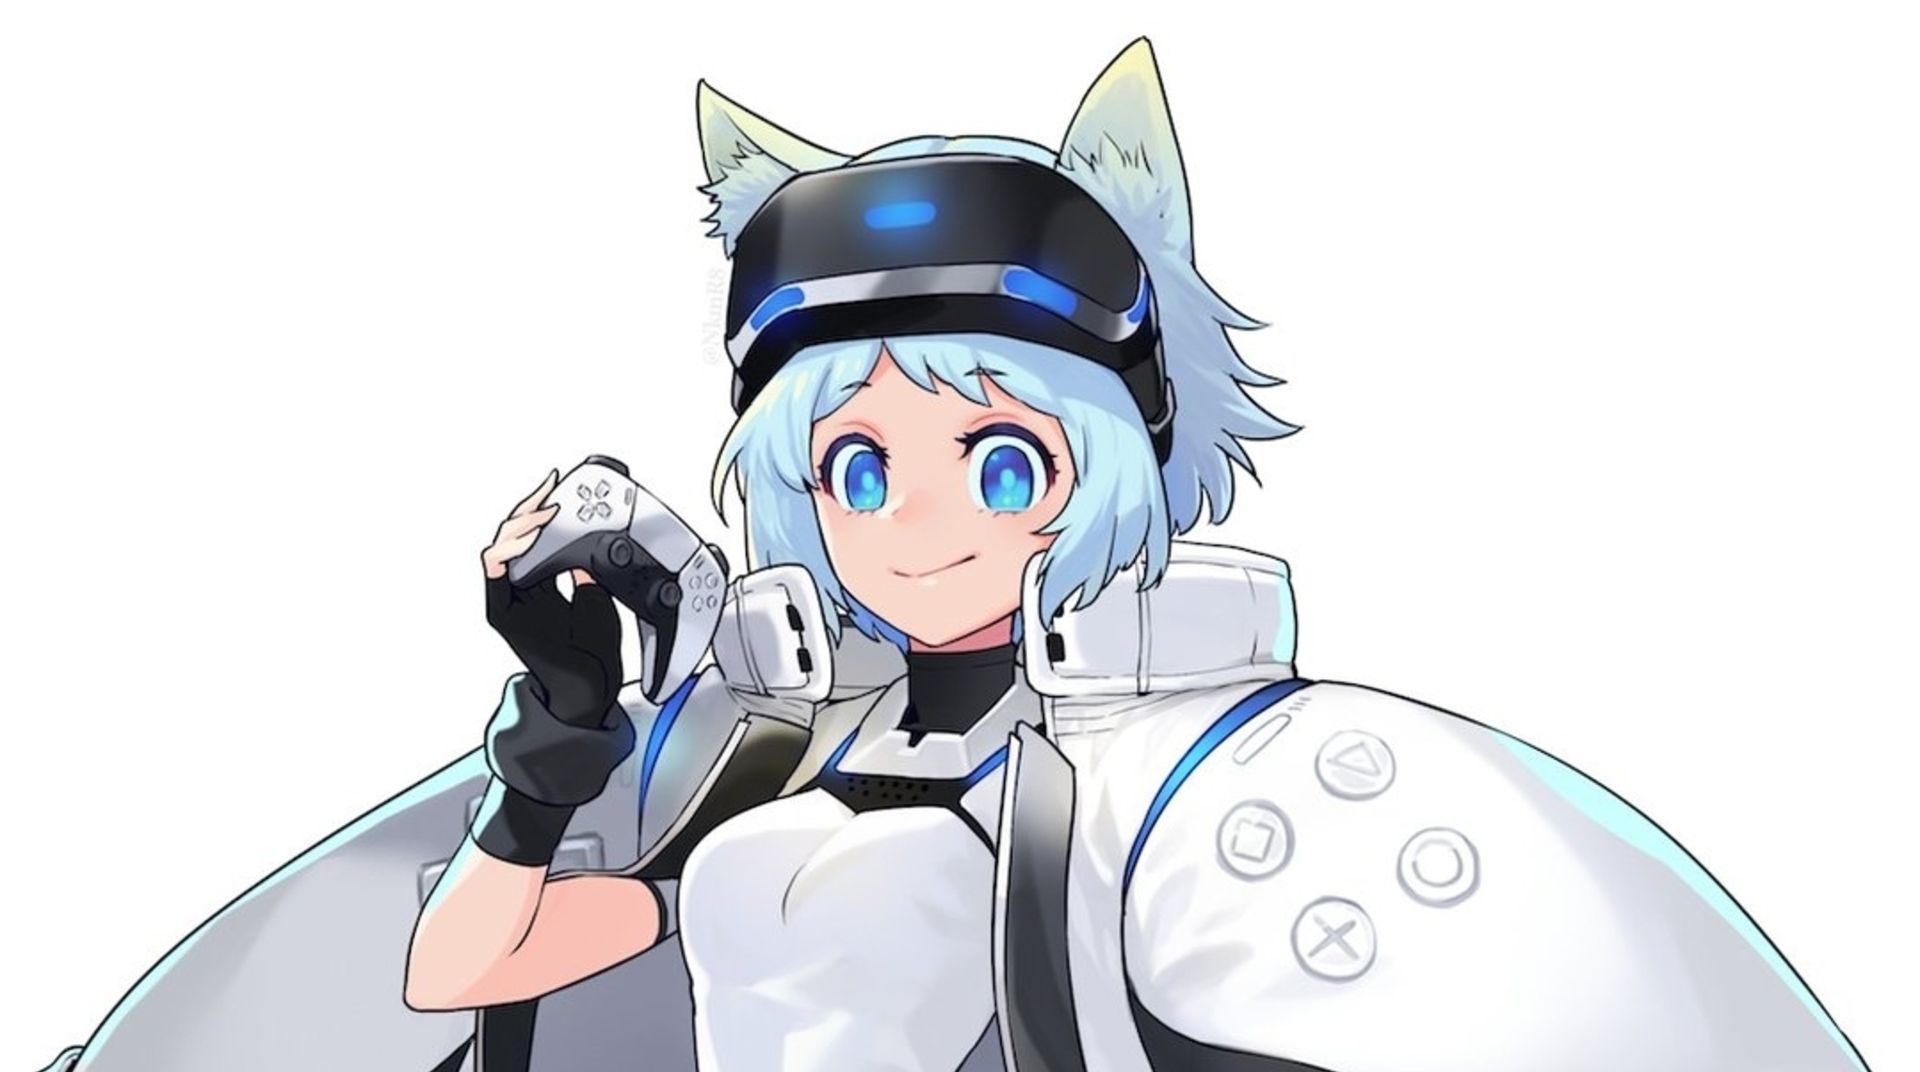 Of course people are drawing the PS5 controller as an anime girl